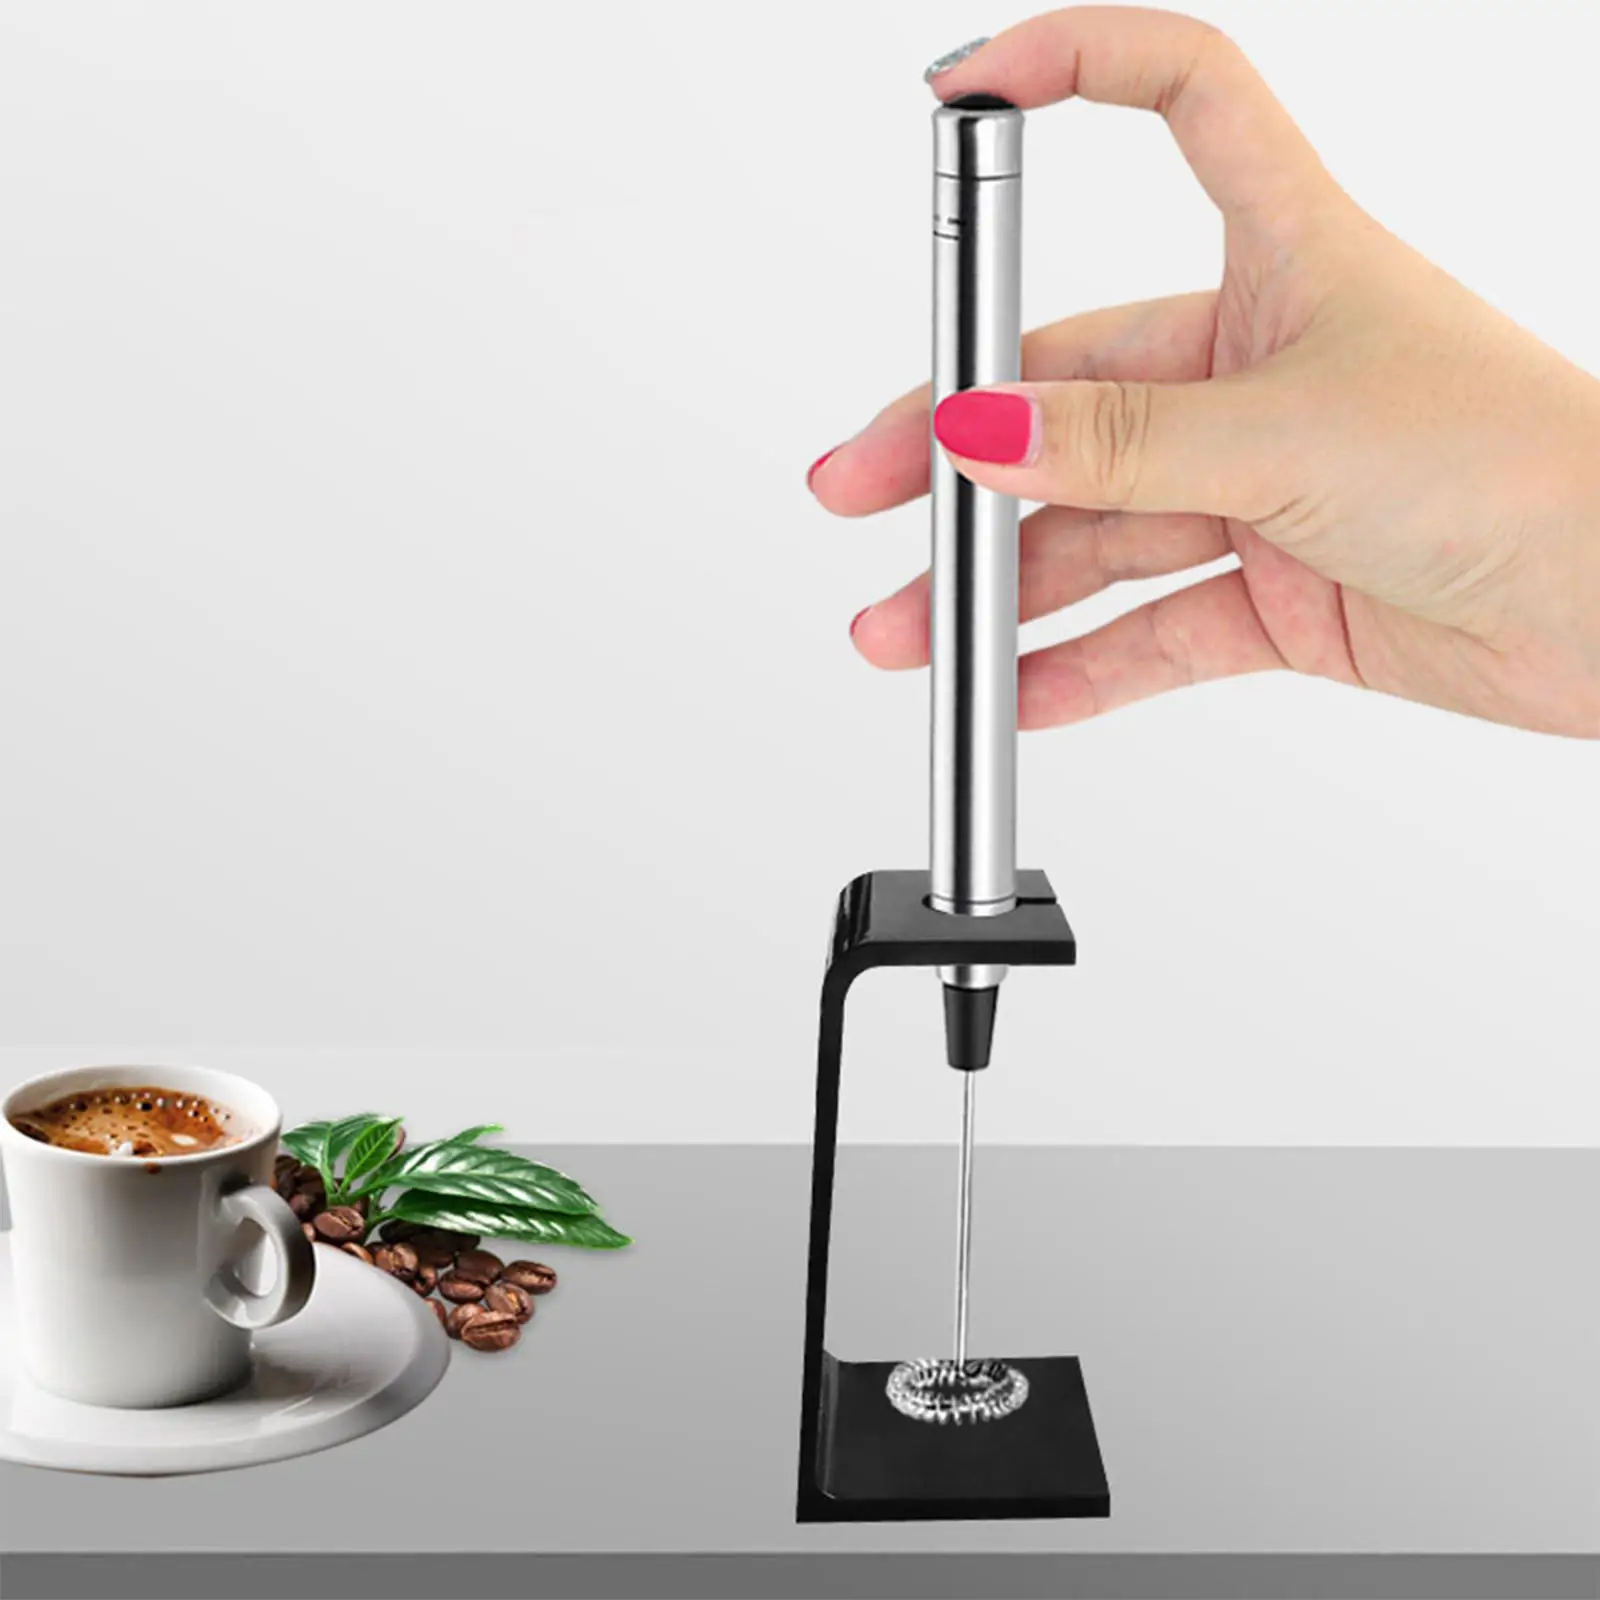 Electric Milk Frother Mini Foamer Electric Mixer Stirrer Coffee Frother Egg Whisk for Cream Cappuccino Latte Hot Chocolate